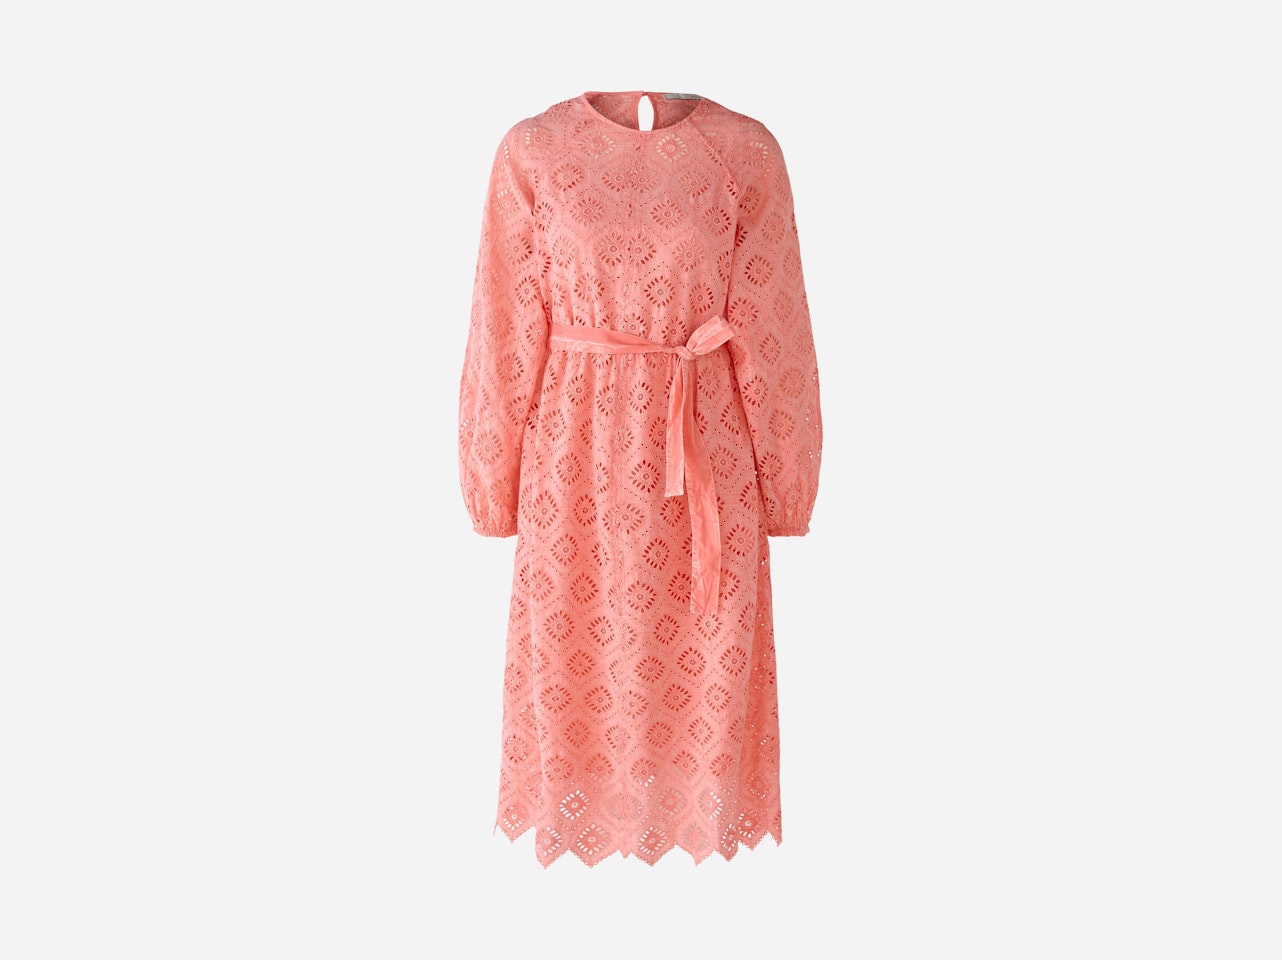 Midi Length Lace Dress slightly fitted in summery flair